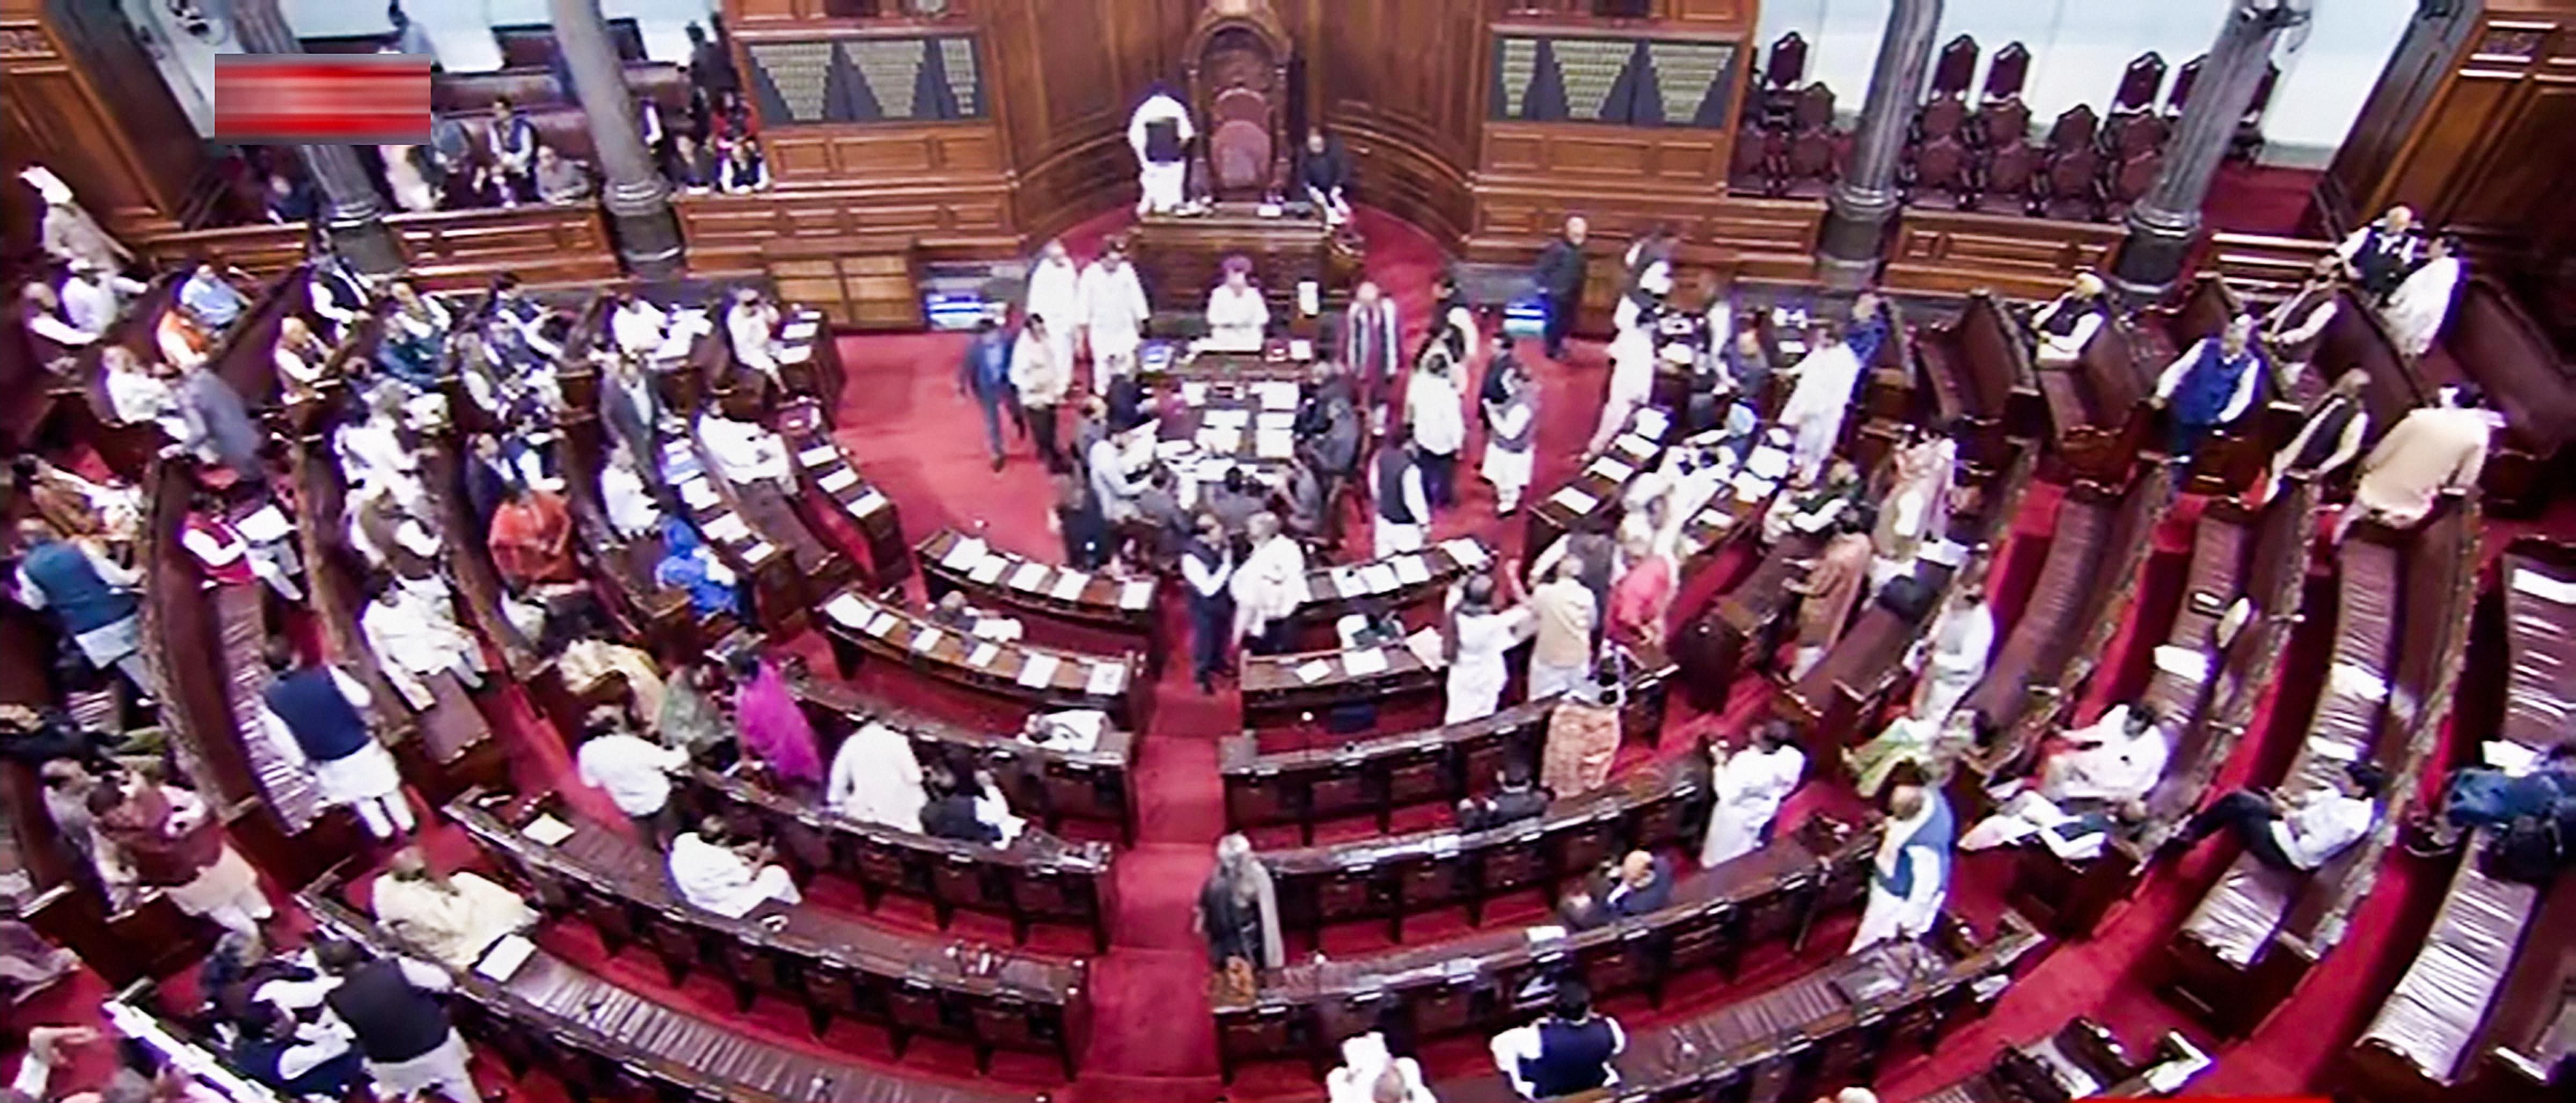 Opposition members protest in the Rajya Sabha during the Budget Session of Parliament, in New Delhi. (Credit: PTI Photo)